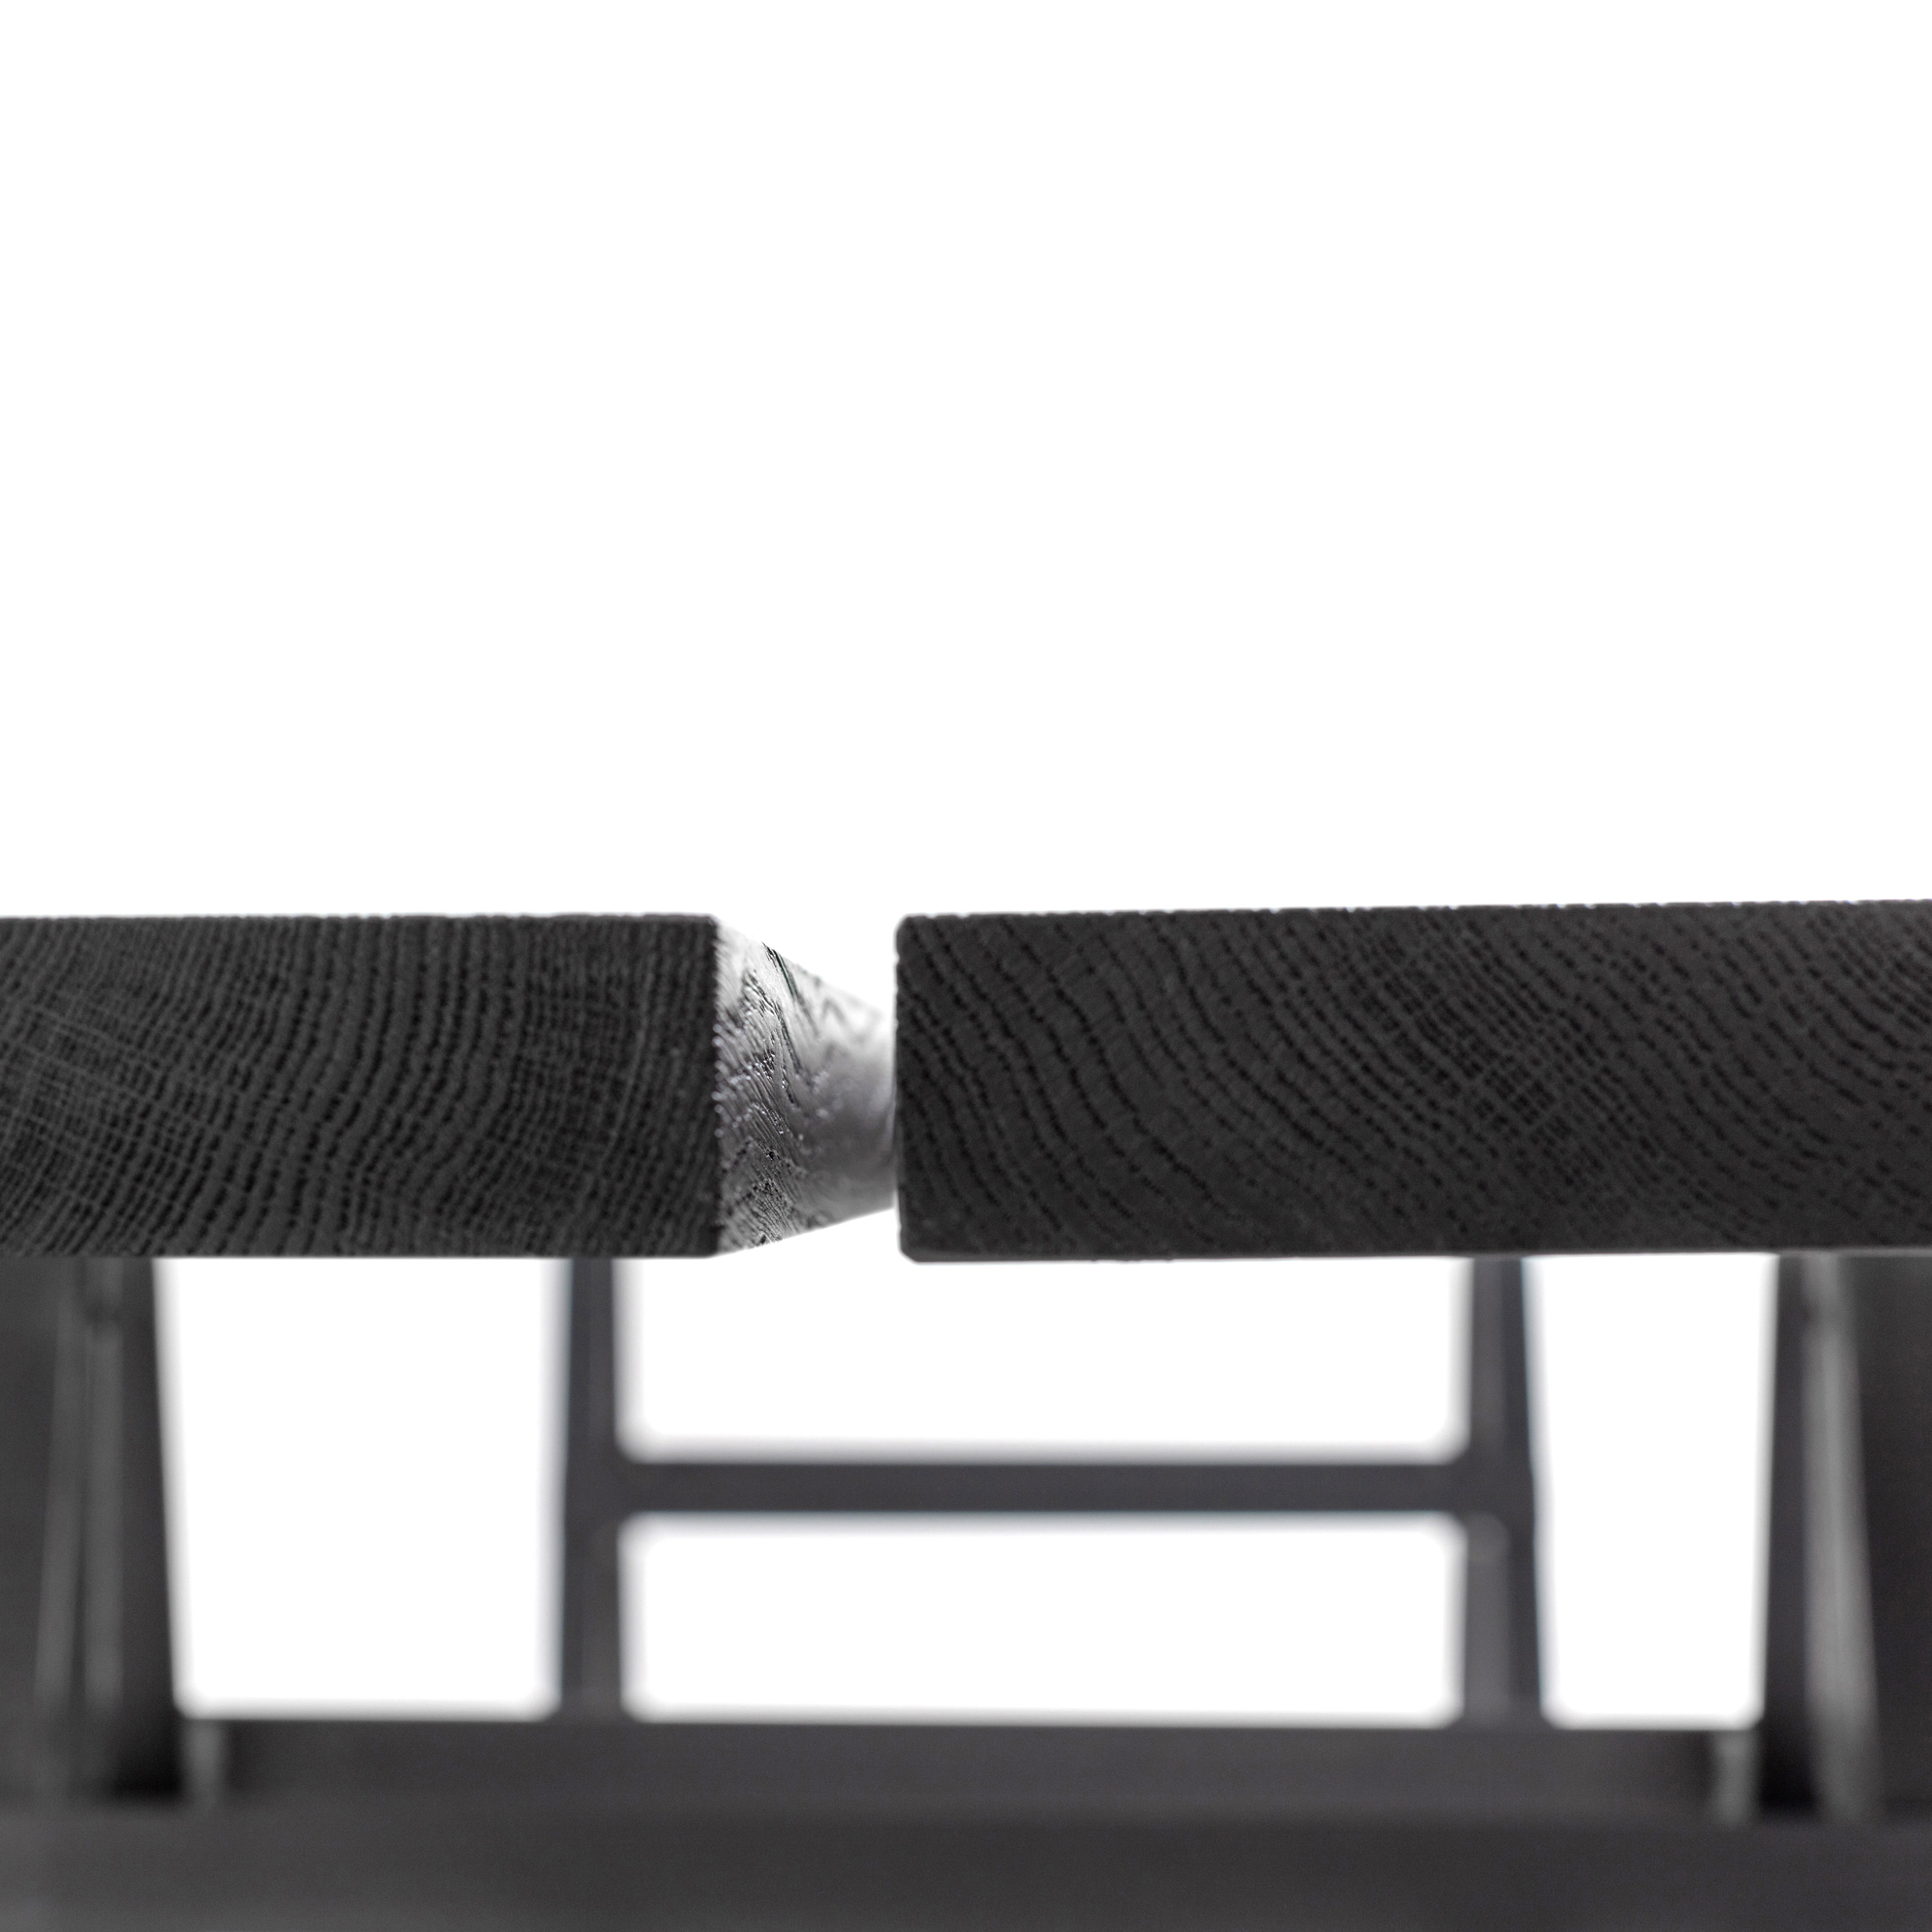 FORM EXCLUSIVE // JOON - IN-/OUTDOOR TABLE | BLACK CARED - 260CM X 45CM X 5CM - MONKEY RAW